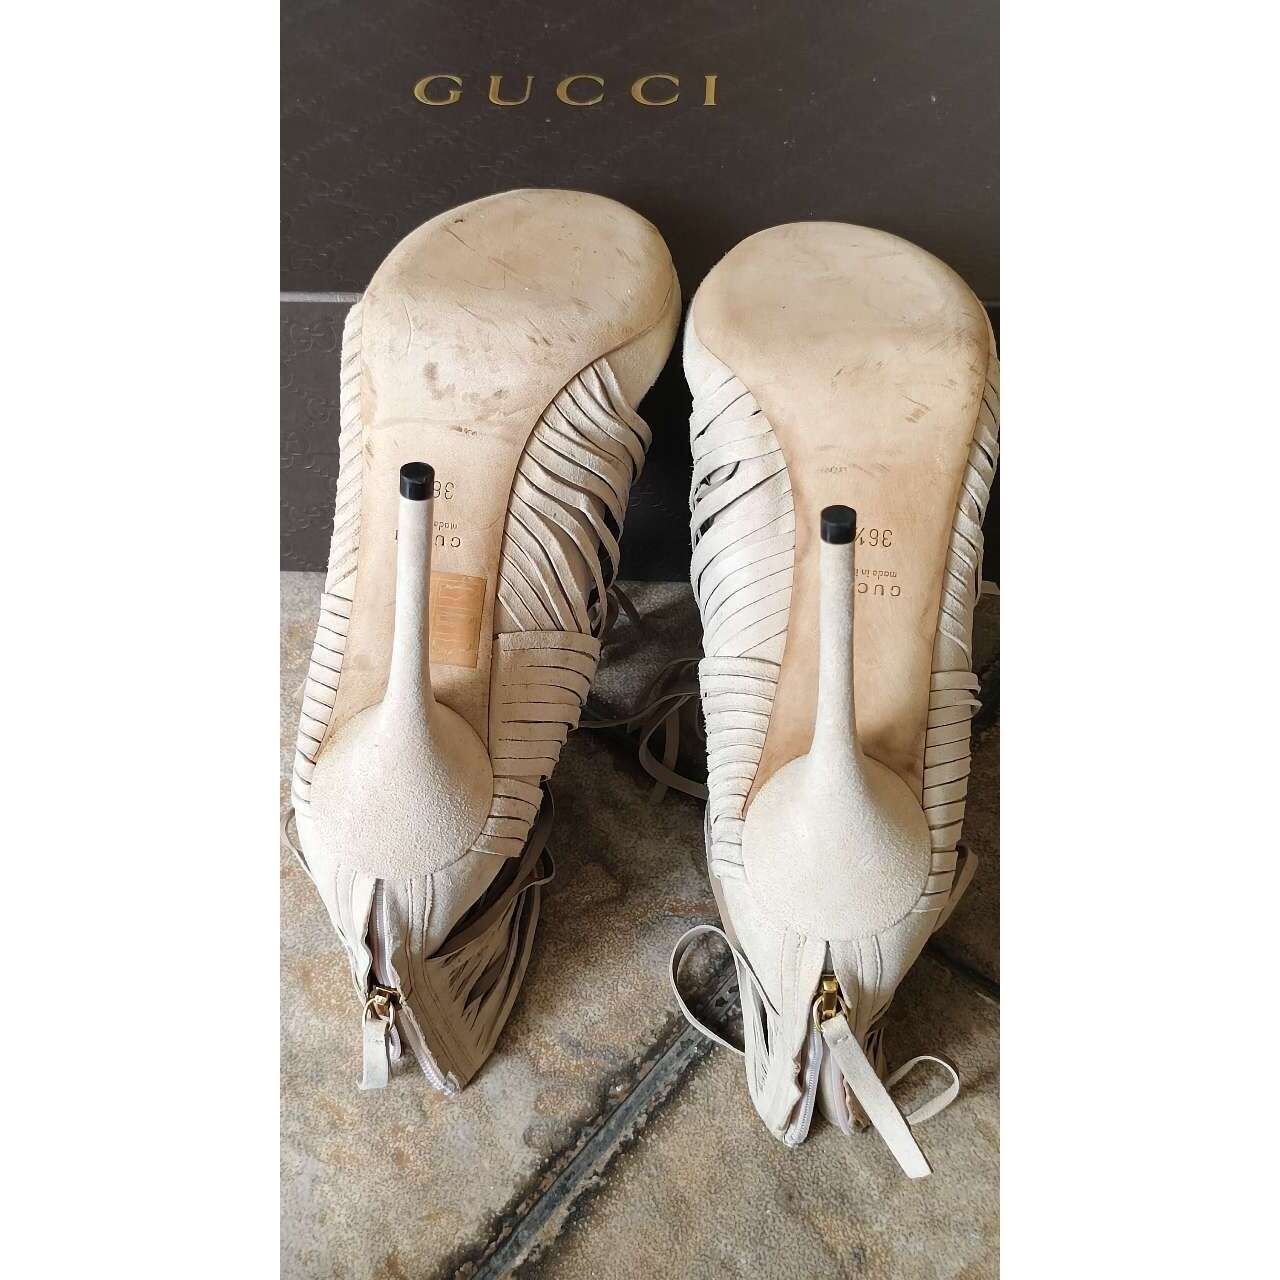 Gucci Fringe Ankle Boots